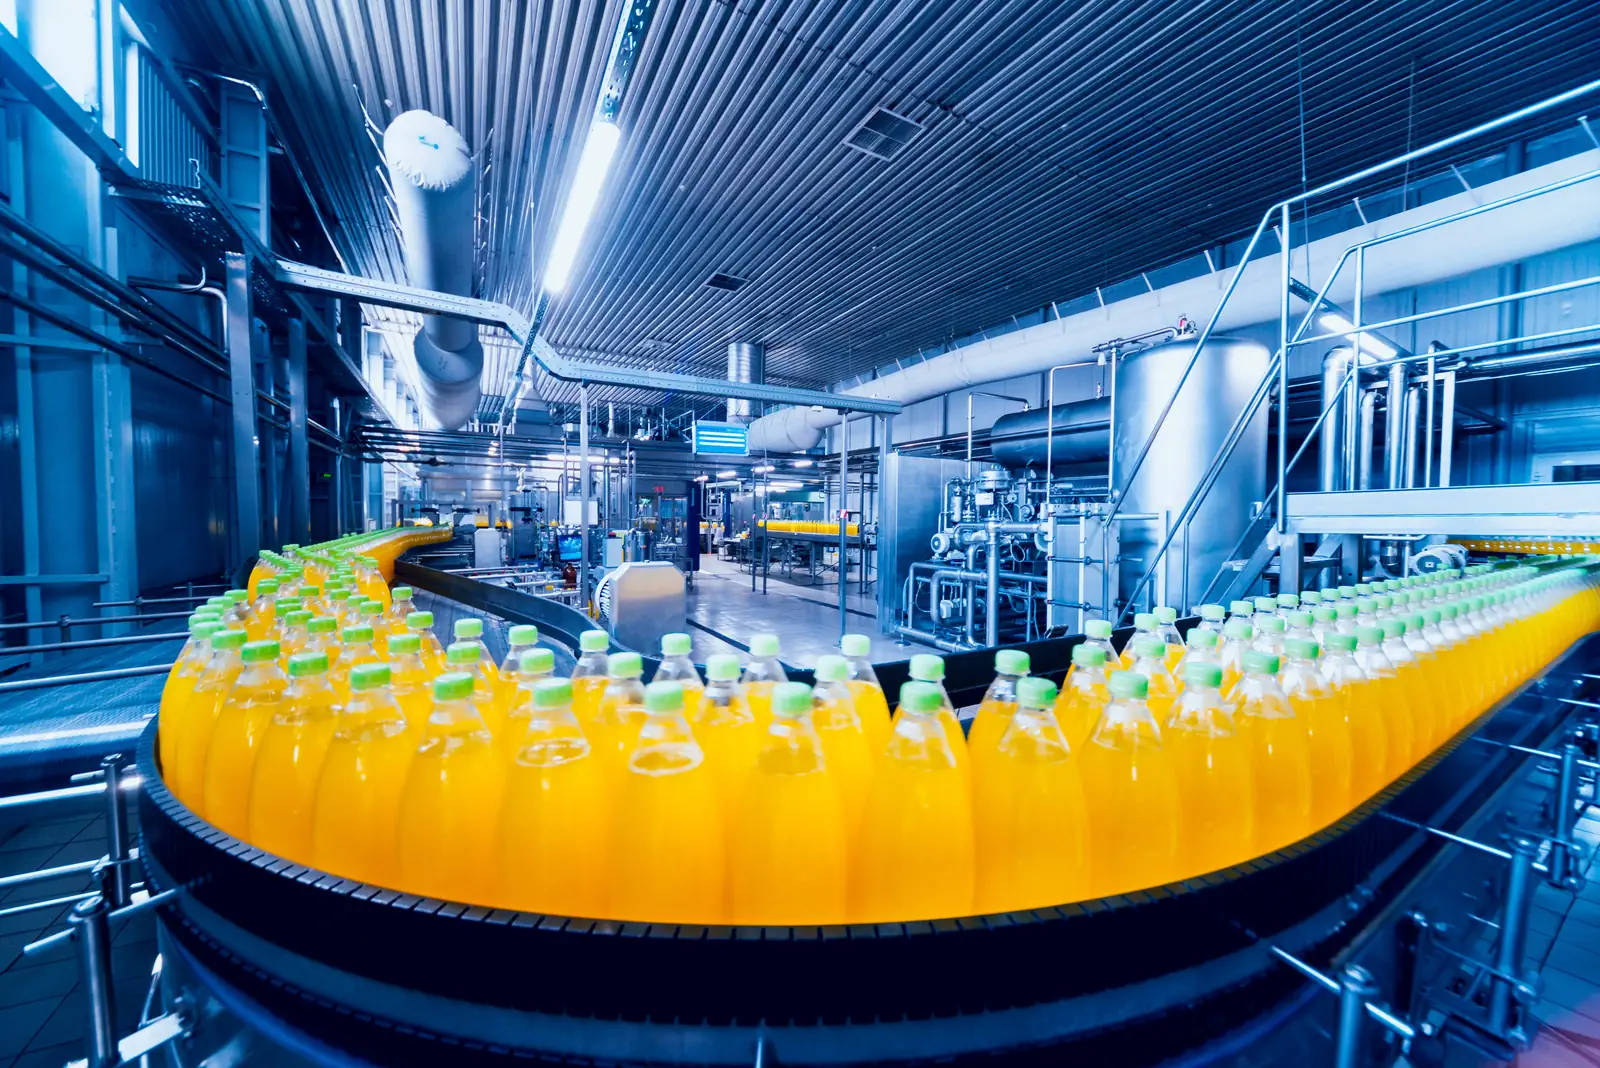 Orange drinks pass through the beverage production and filling line.